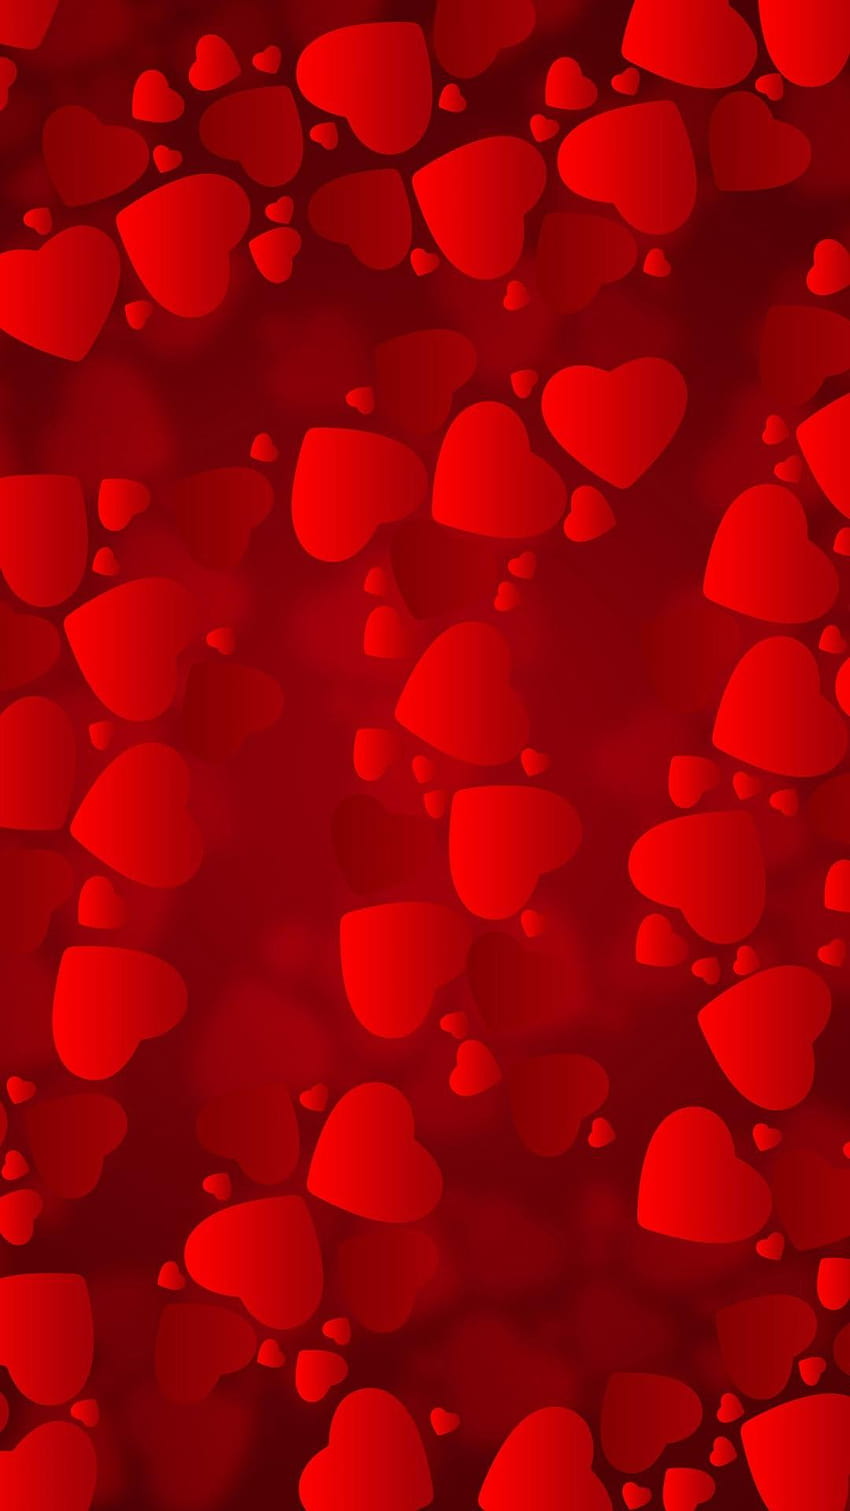 Cute Valentine's Day Wallpaper and Backgrounds | POPSUGAR Tech